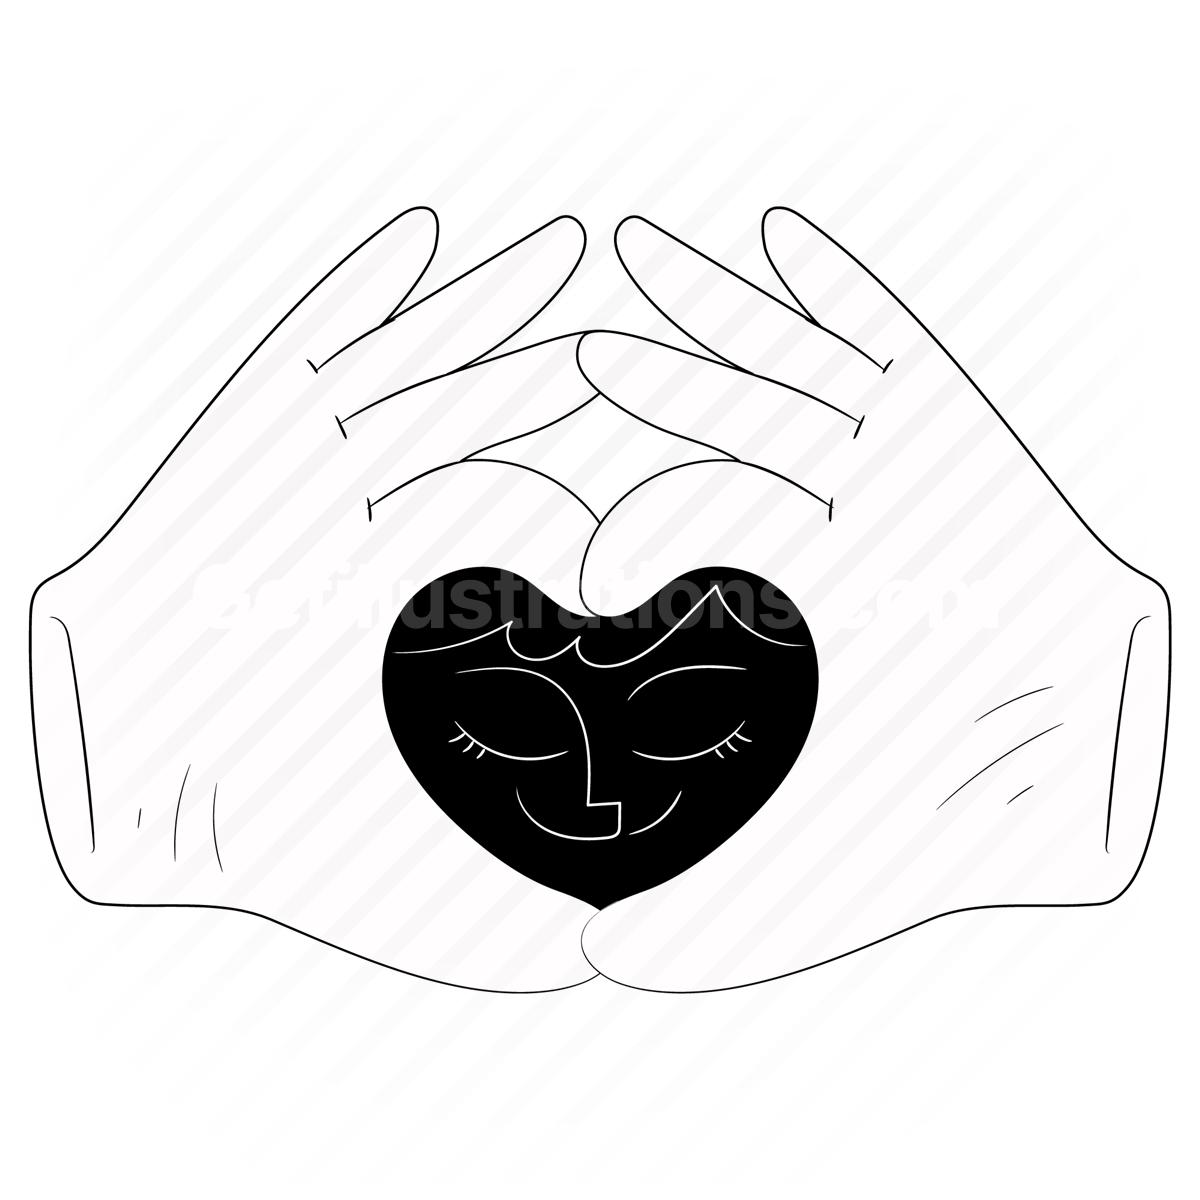 love, heart, hand, hands, relationships, relationship, dating, protect